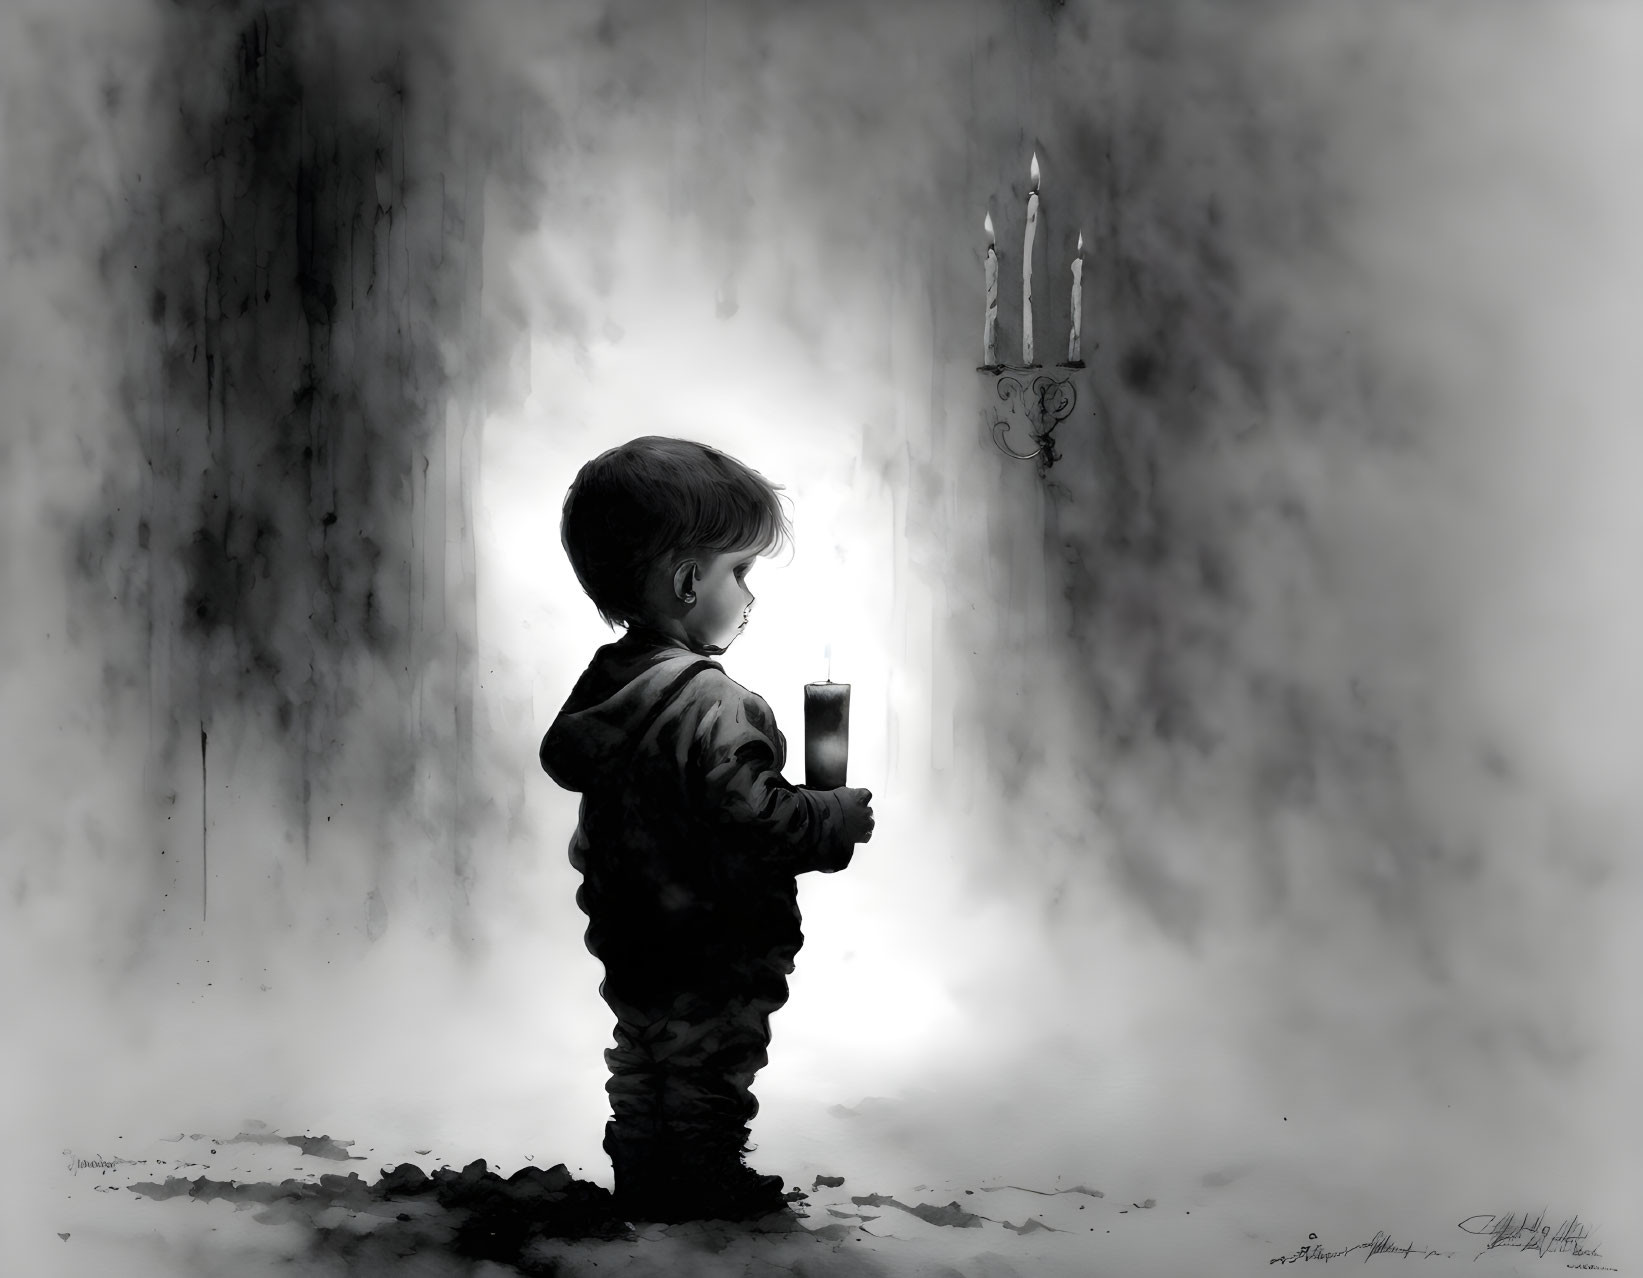 Monochrome illustration of child with candle in misty space